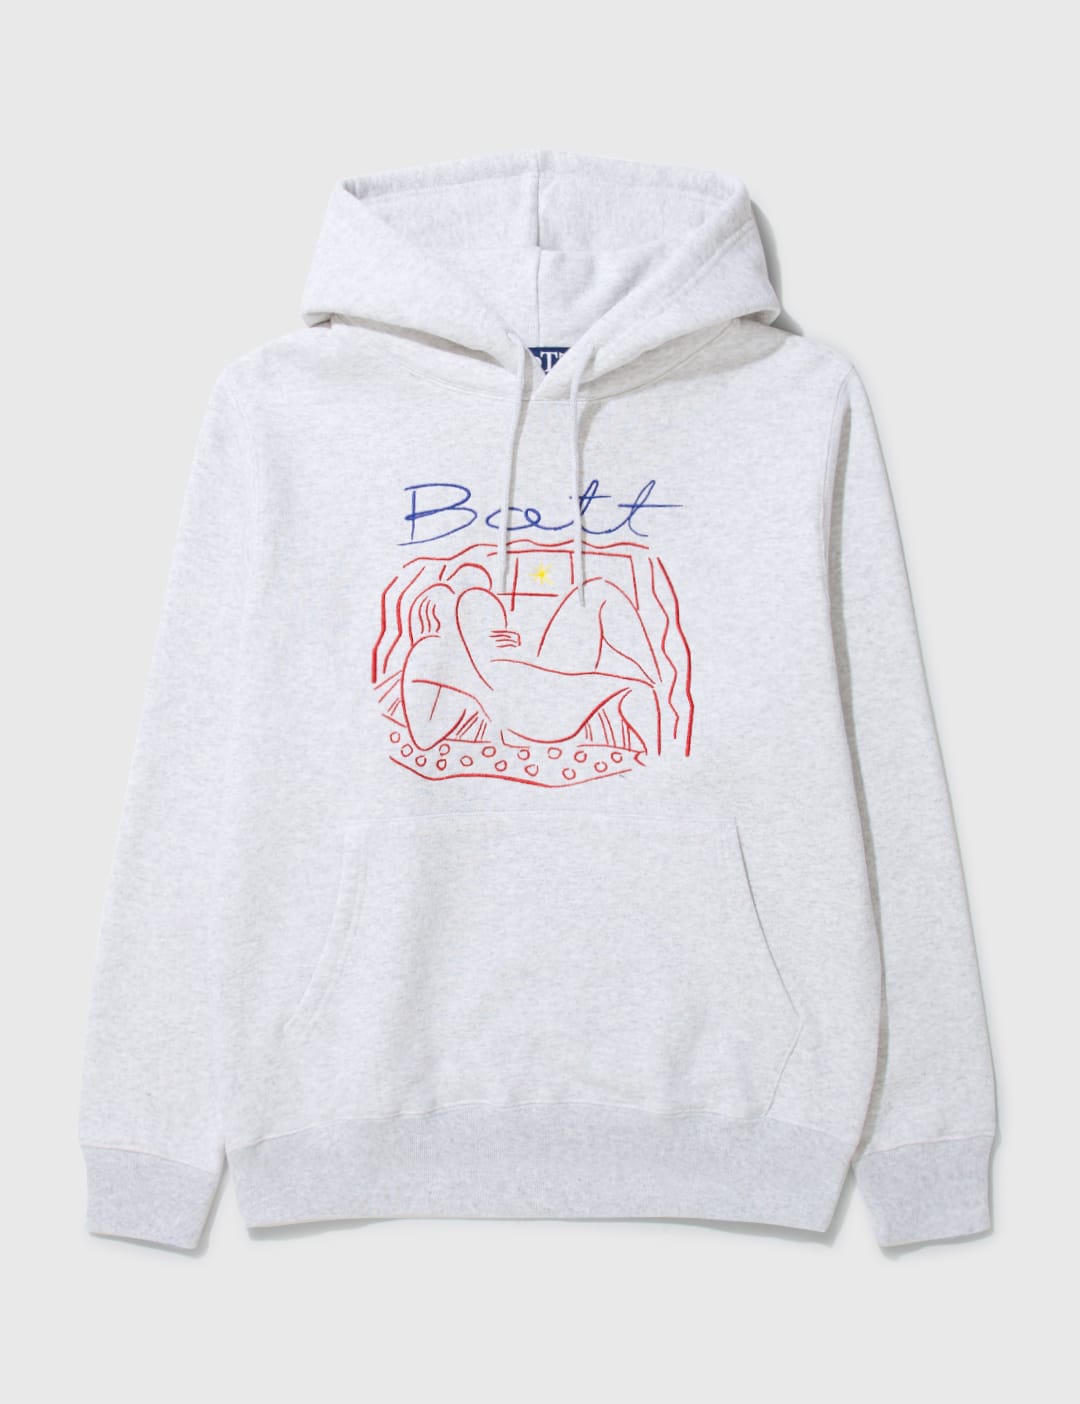 BoTT - Real Love Pullover Hoodie | HBX - Globally Curated Fashion